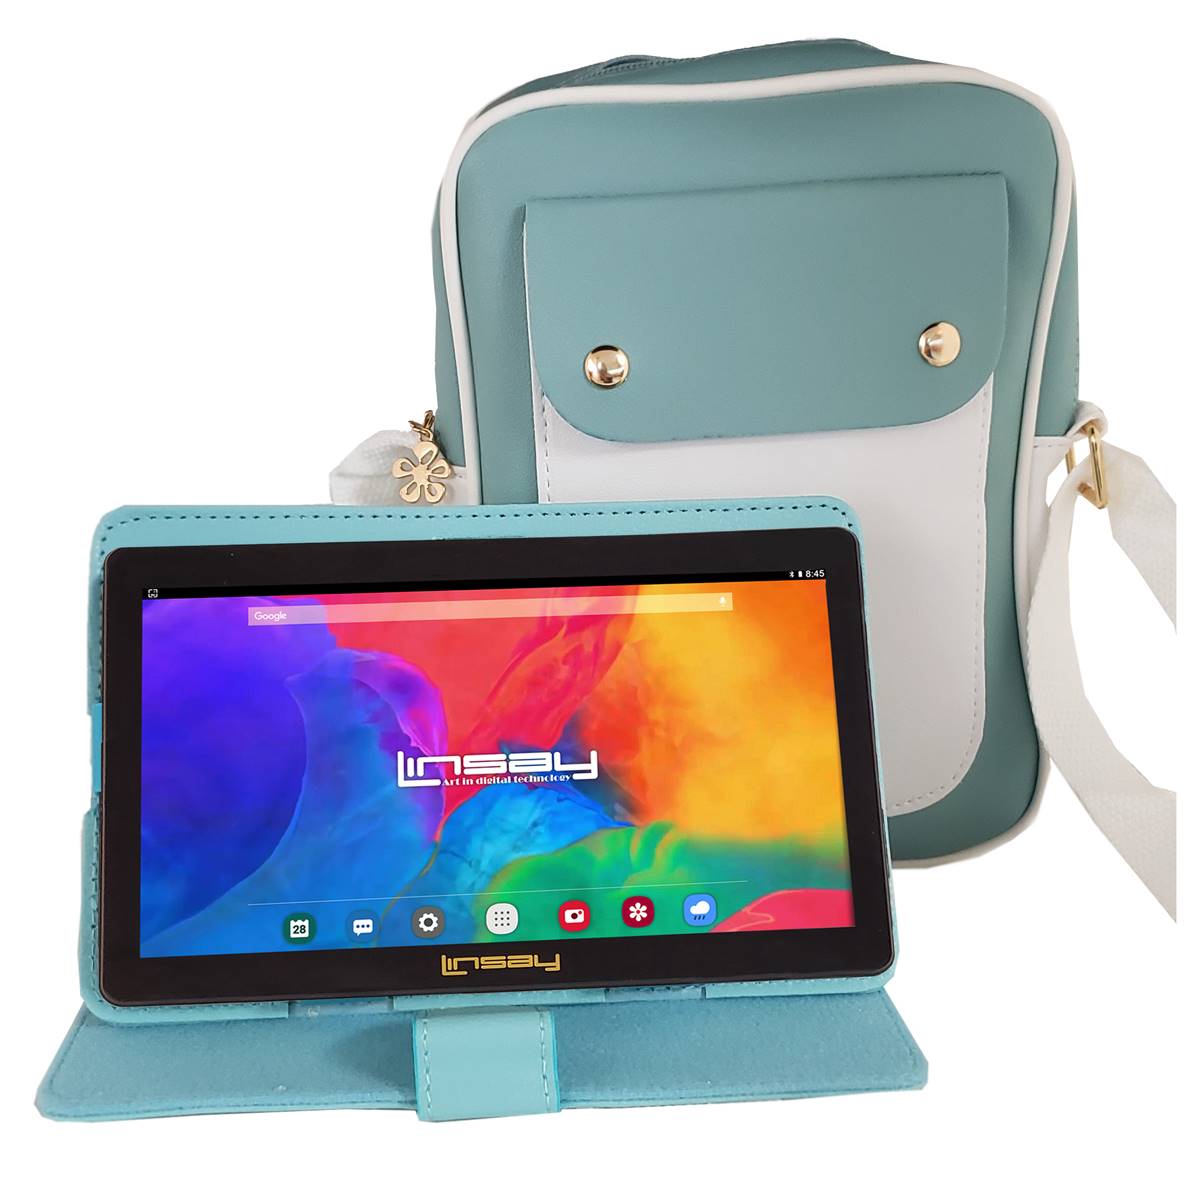 Linsay 7in. Quad Core Tablet With Lovely Sky Blue Fashion Handbag